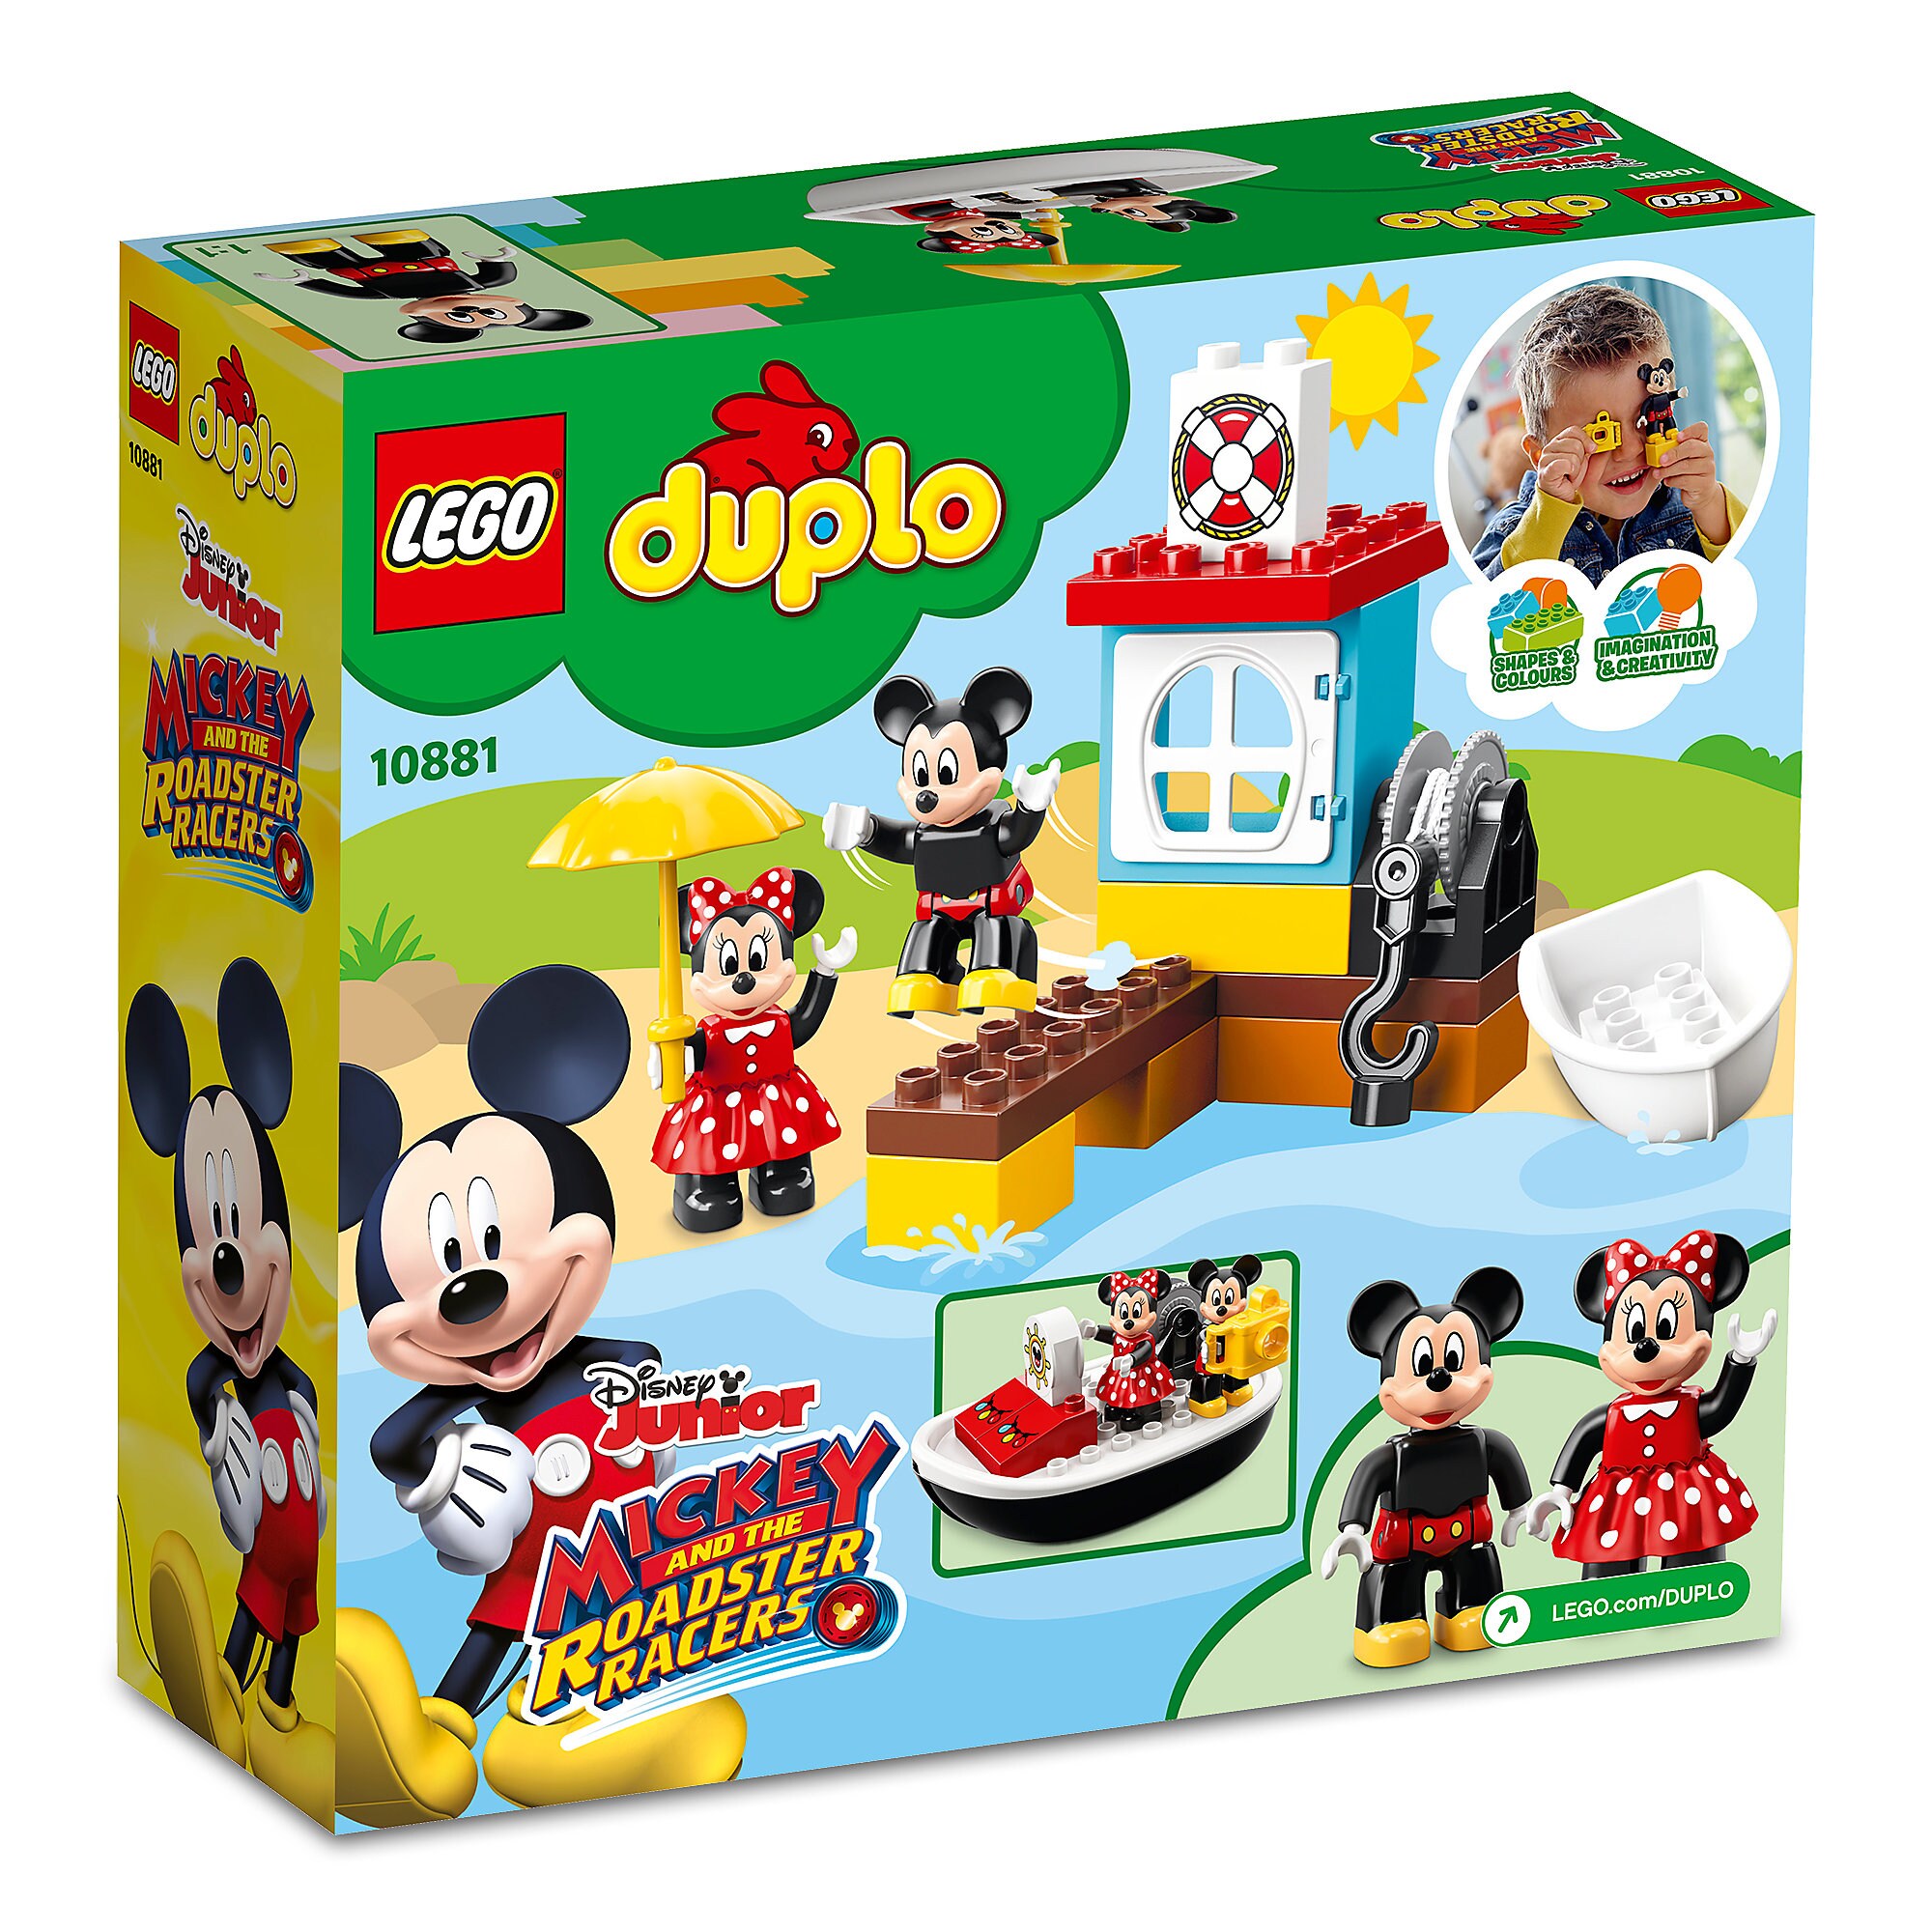 Mickey Mouse Boat Duplo Playset by LEGO - Mickey and the Roadster Racers